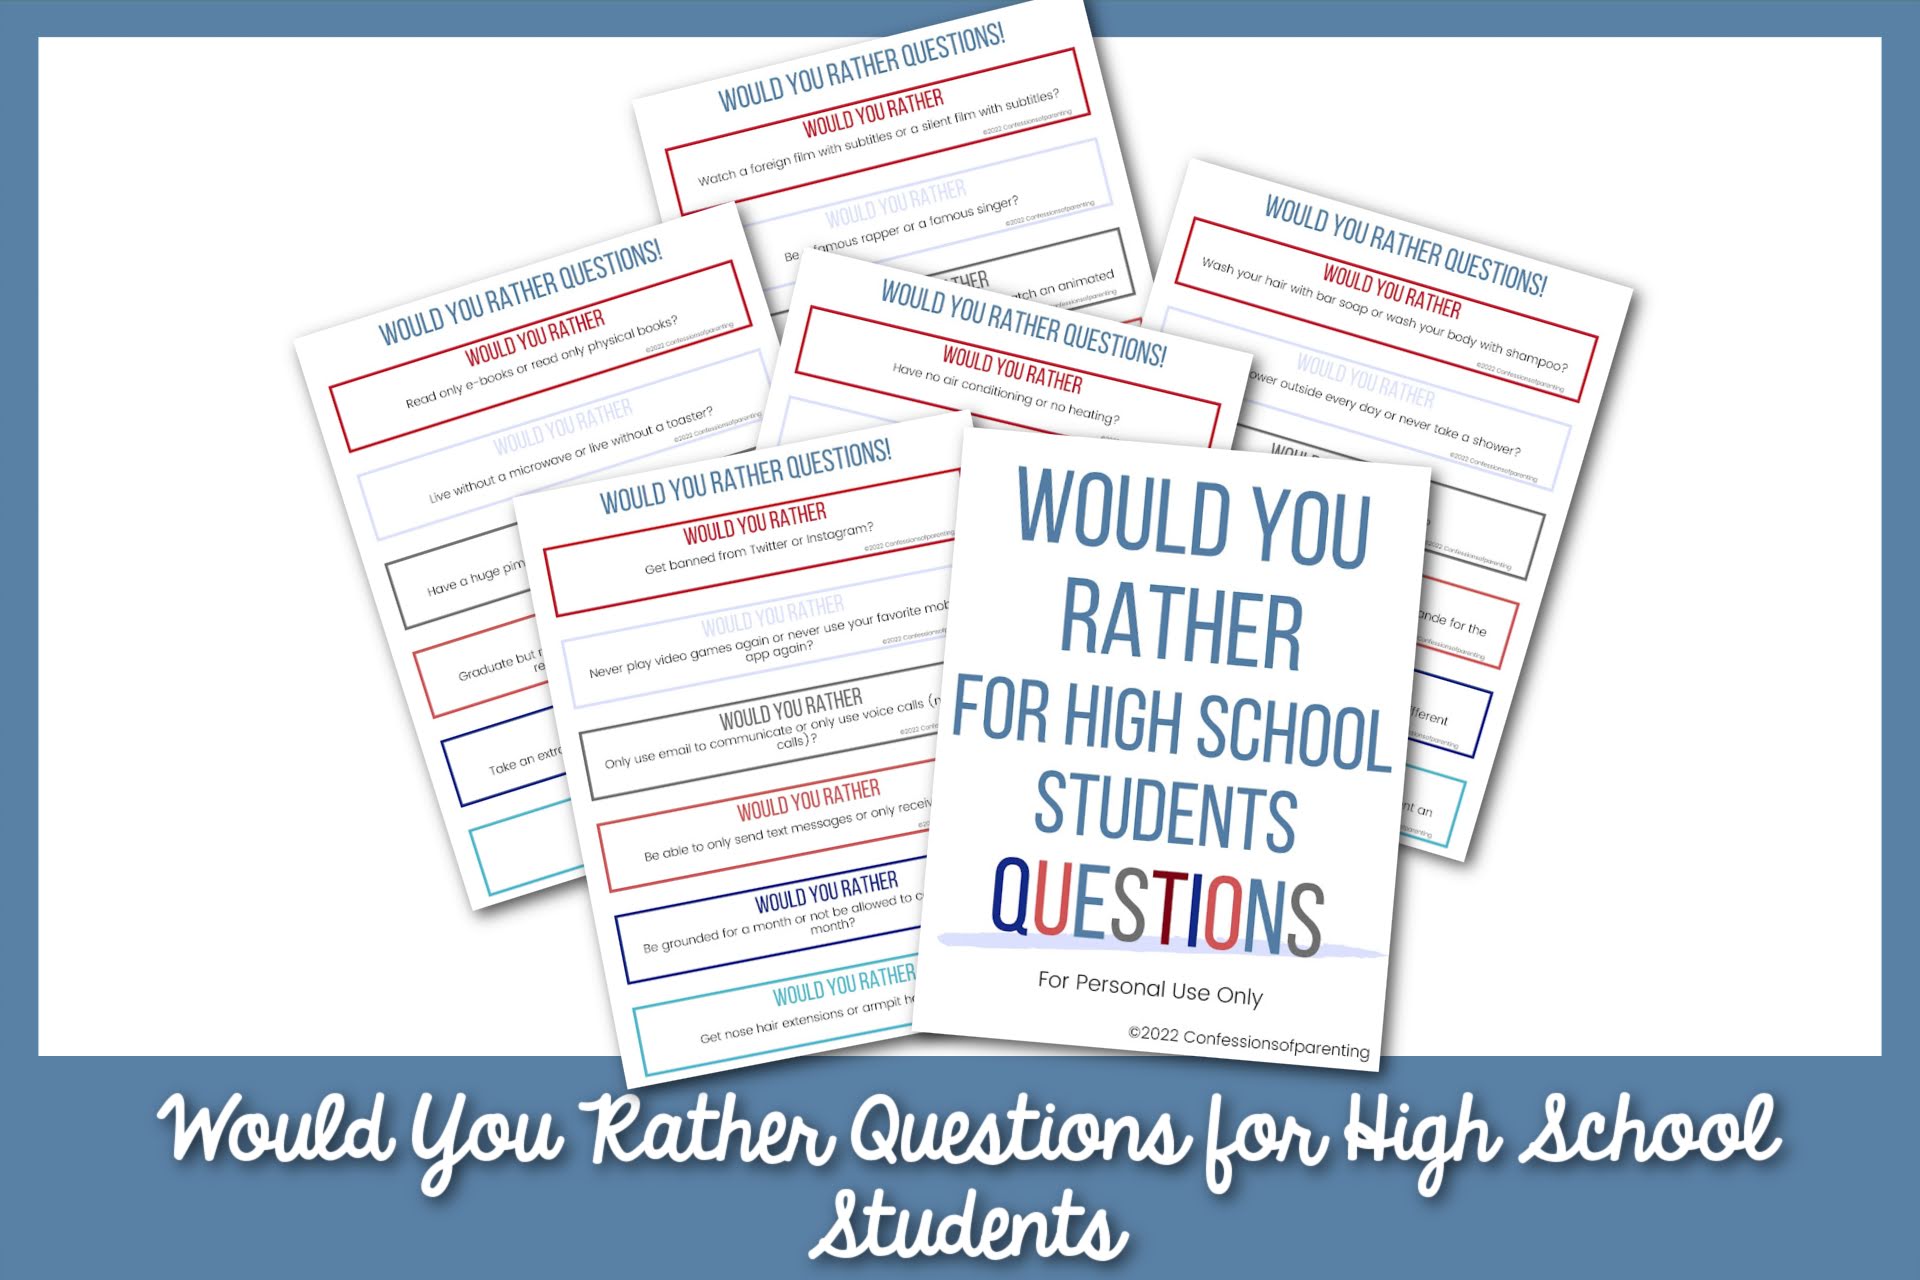 featured image: would you rather for high school students questions on a blue border